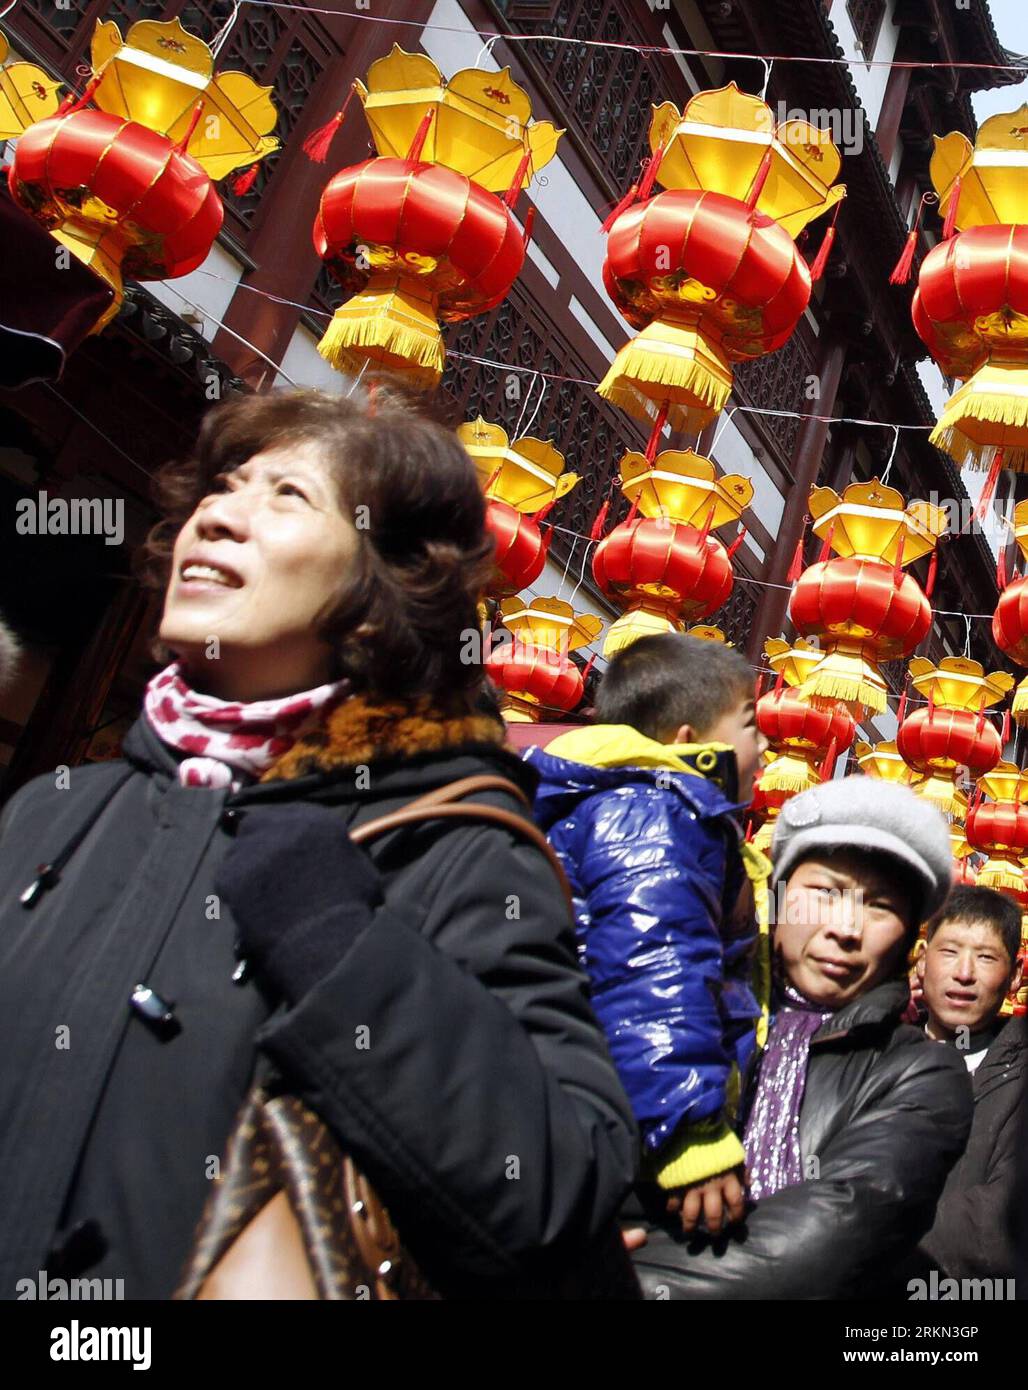 Bildnummer: 56948594  Datum: 24.01.2012  Copyright: imago/Xinhua (120124) -- SHANGHAI, Jan. 24, 2012 (Xinhua) -- Tourists visit a lantern fair held in the chenghuang temple to celebrate the Spring Festival in Shanghai, east China, Jan. 24, 2012, the second day of the Chinese Lunar New Year. (Xinhua/Zhang Ming)(mcg) CHINA-SHANGHAI-LANTERN FAIR (CN) PUBLICATIONxNOTxINxCHN Gesellschaft Neujahr Neujahrsfest Frühlingsfest xbs x0x 2012 hoch      56948594 Date 24 01 2012 Copyright Imago XINHUA  Shanghai Jan 24 2012 XINHUA tourists Visit a Lantern Fair Hero in The Cheng Huang Temple to Celebrate The S Stock Photo